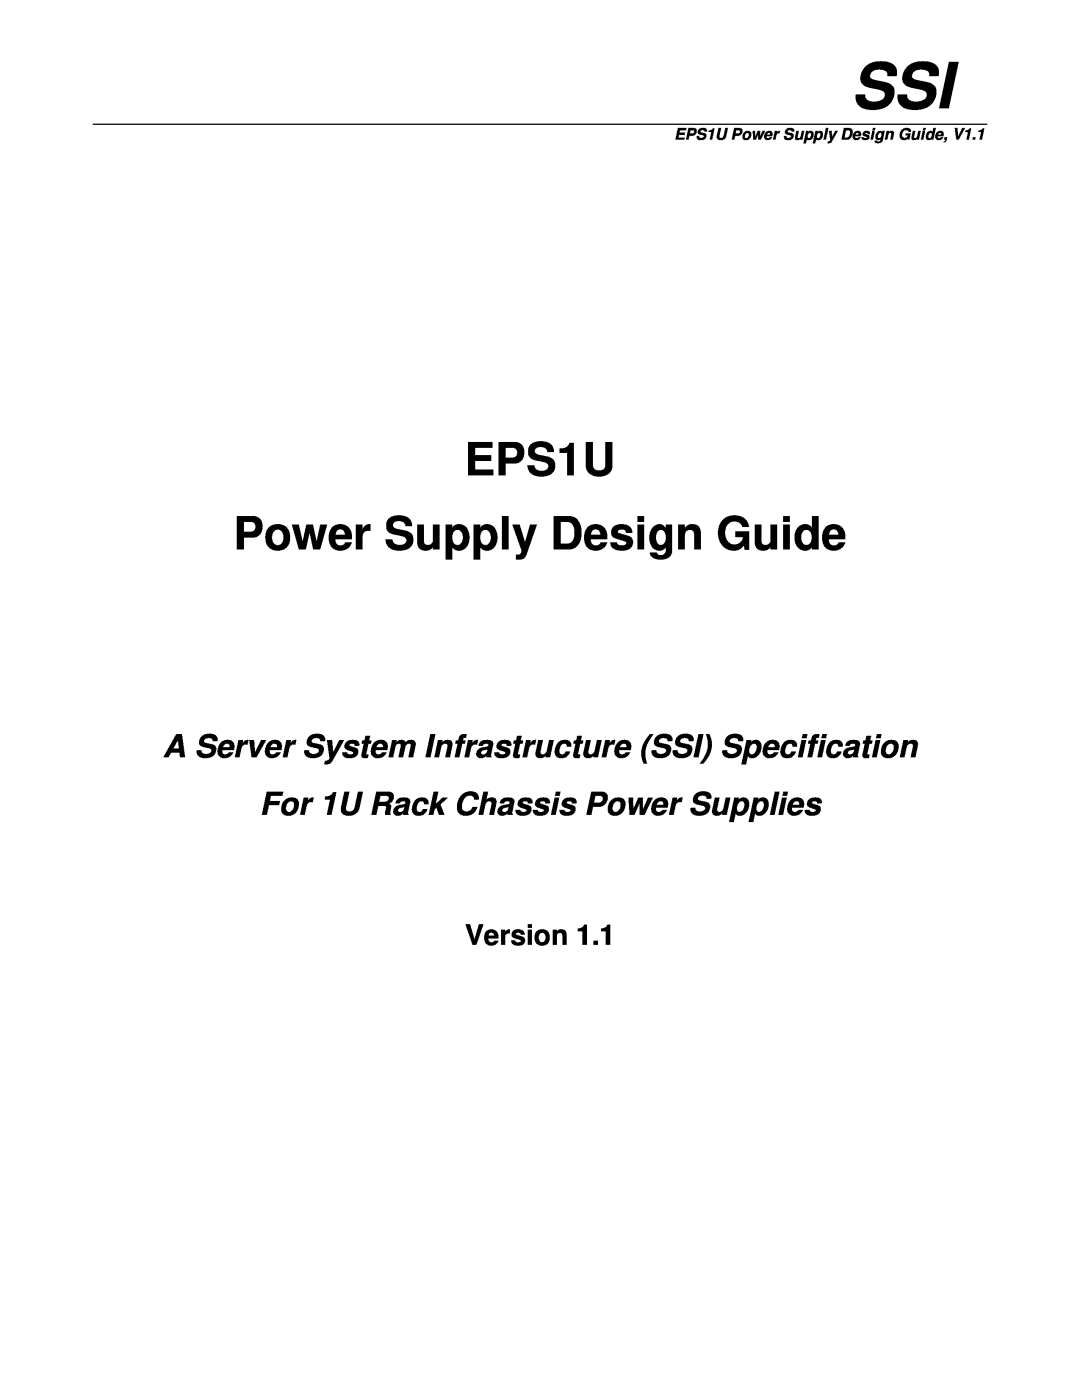 Intel manual EPS1U Power Supply Design Guide, A Server System Infrastructure SSI Specification, Version 